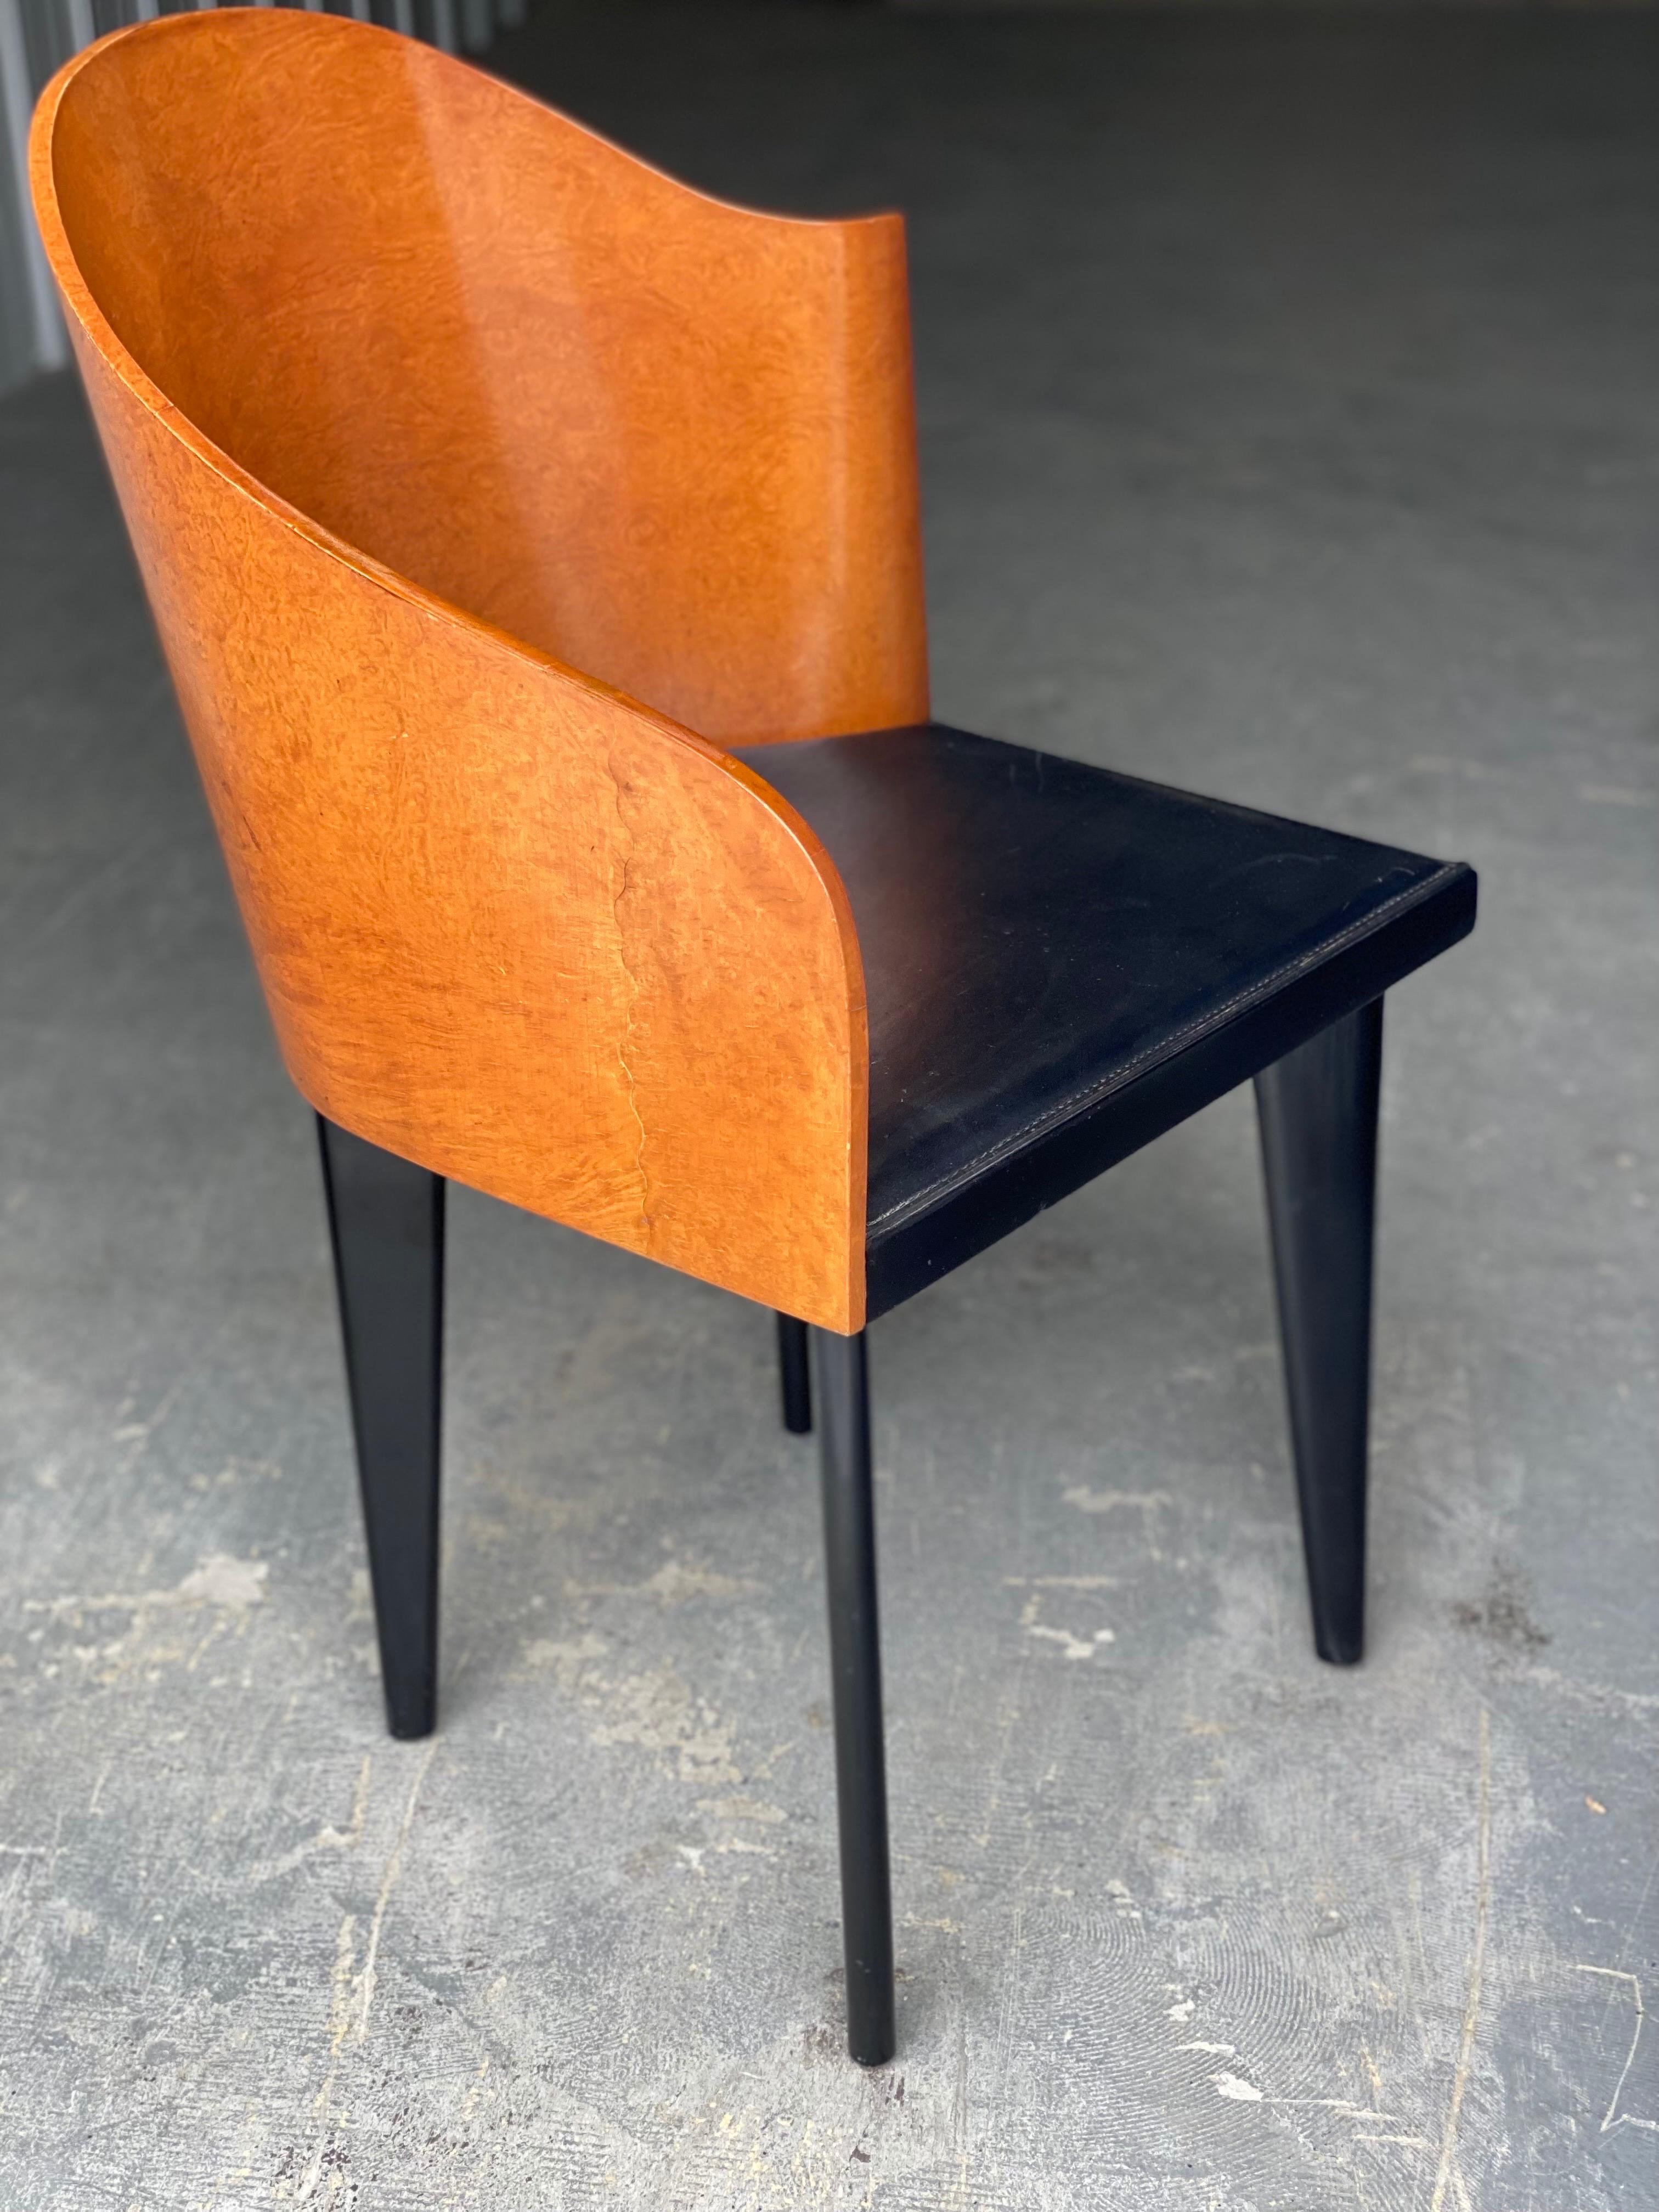 Leather A Single Toscana Chair Designed by Piero Sartogo for Saporiti For Sale